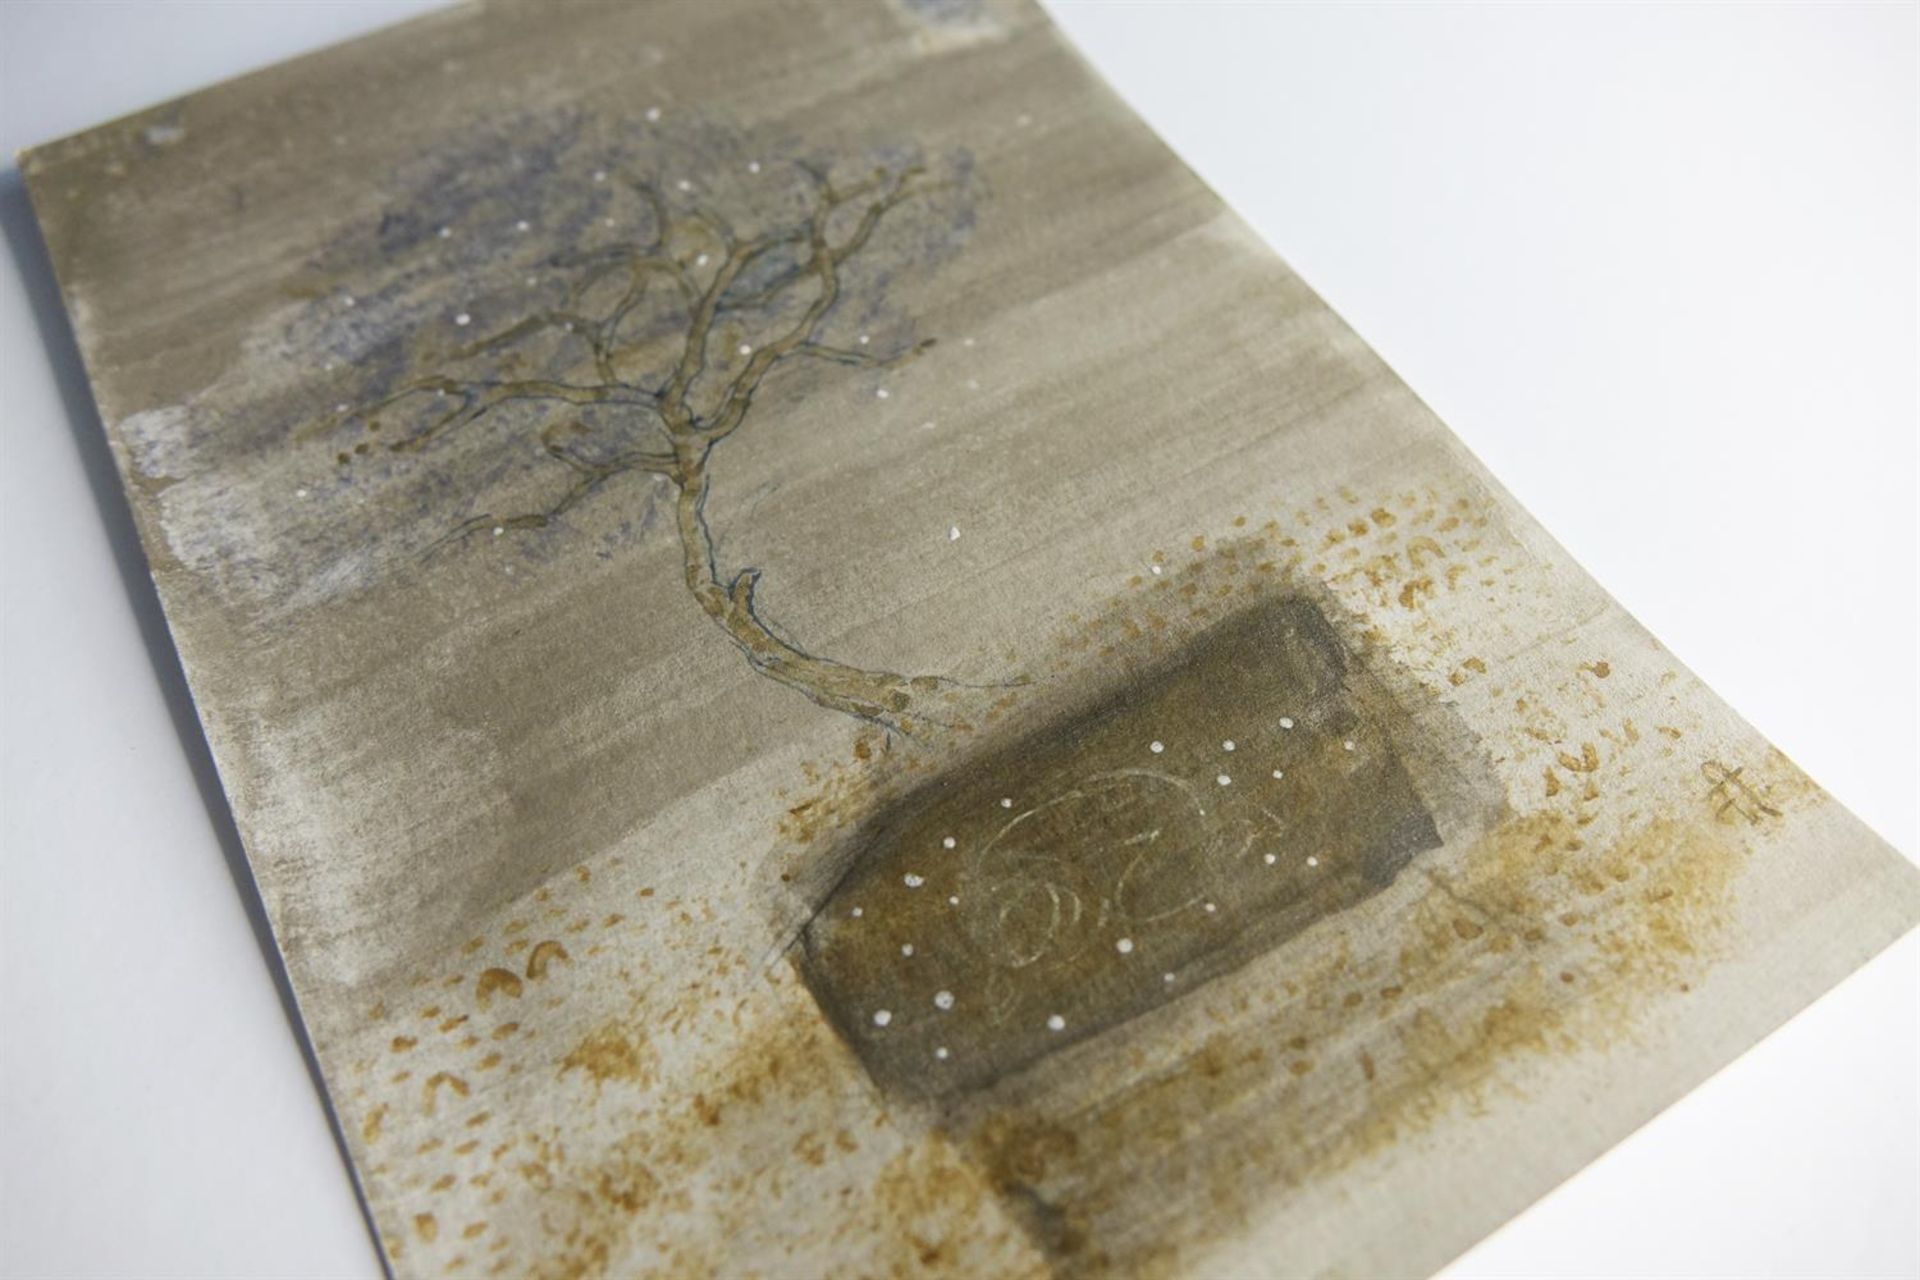 Nilima Sheikh, At The Root of Which Tree?, 2022 - Image 3 of 3